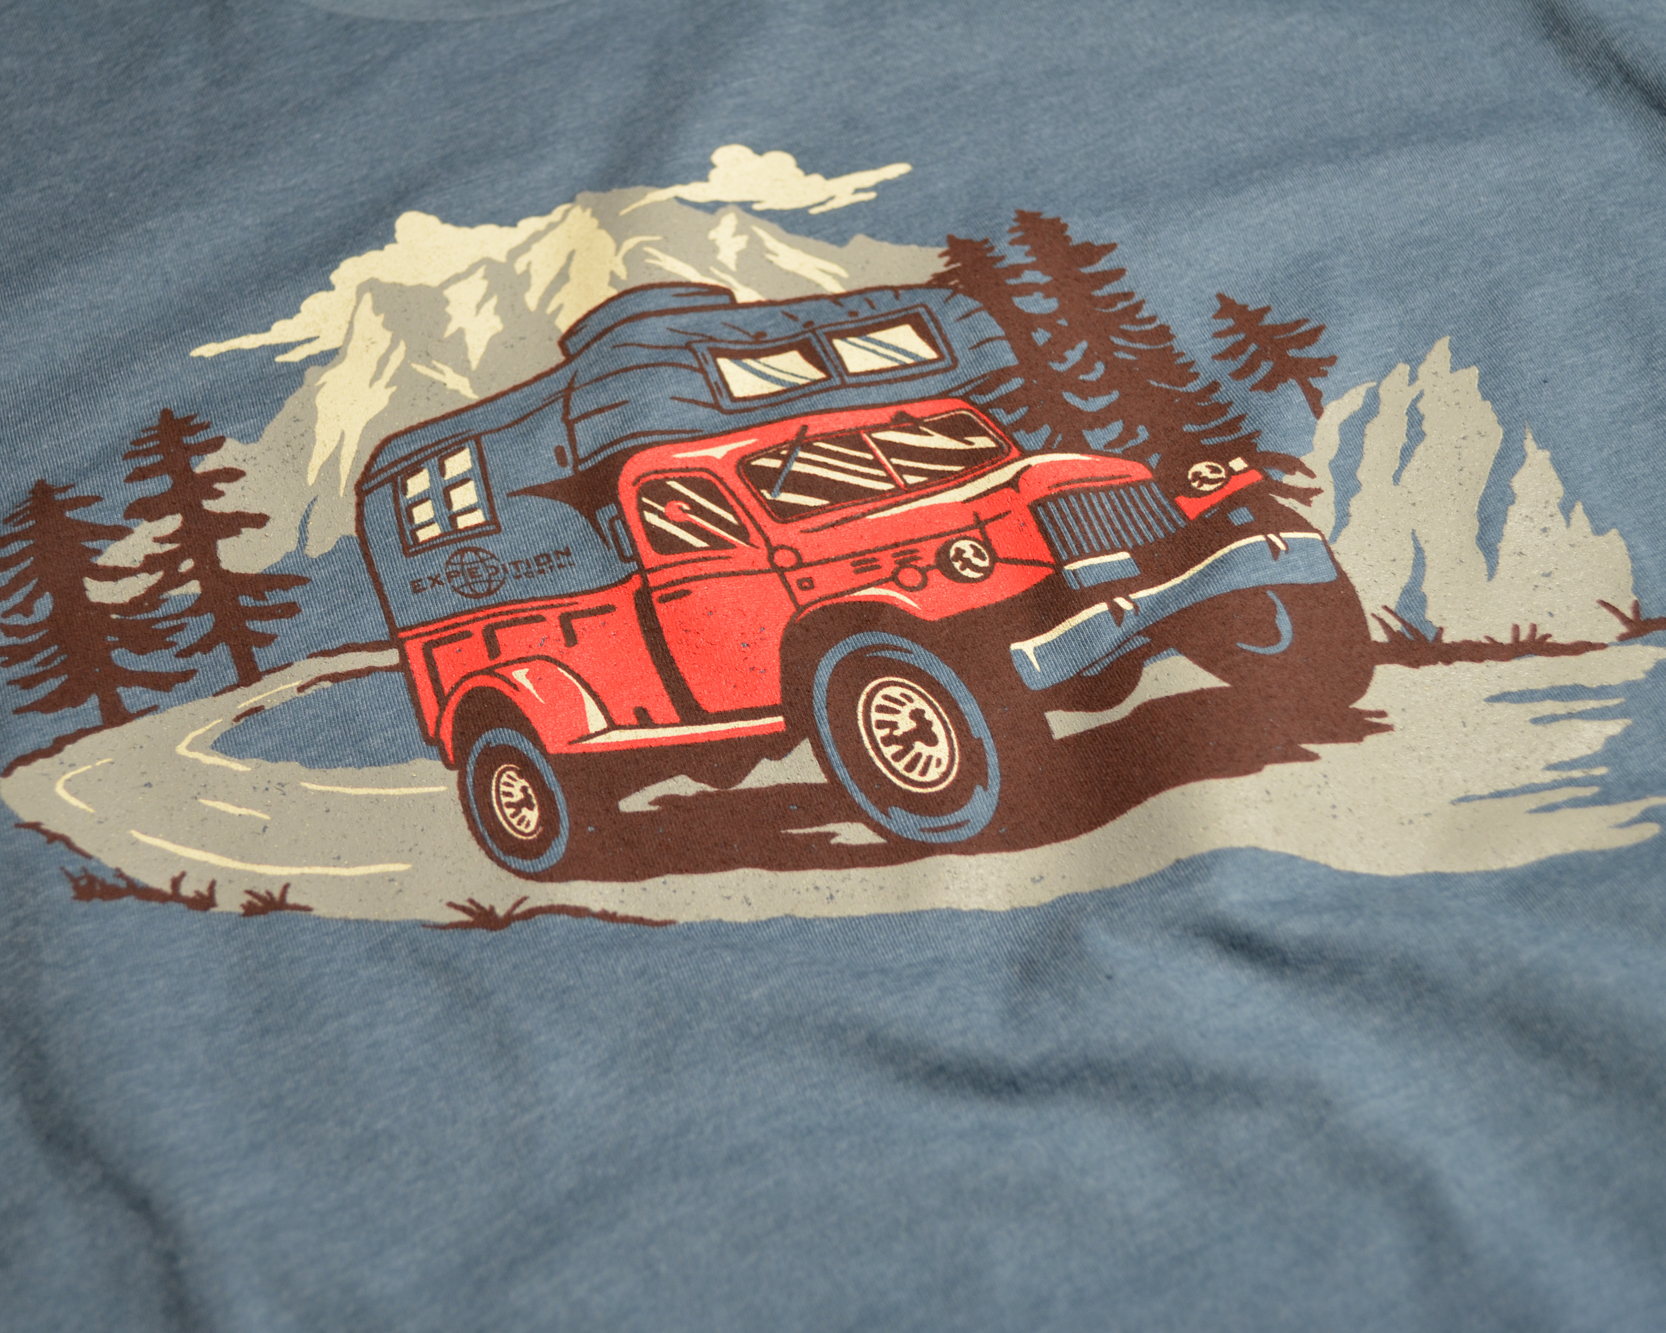 New Expedition Portal & Overland Journal Shirts are Here! - Expedition ...